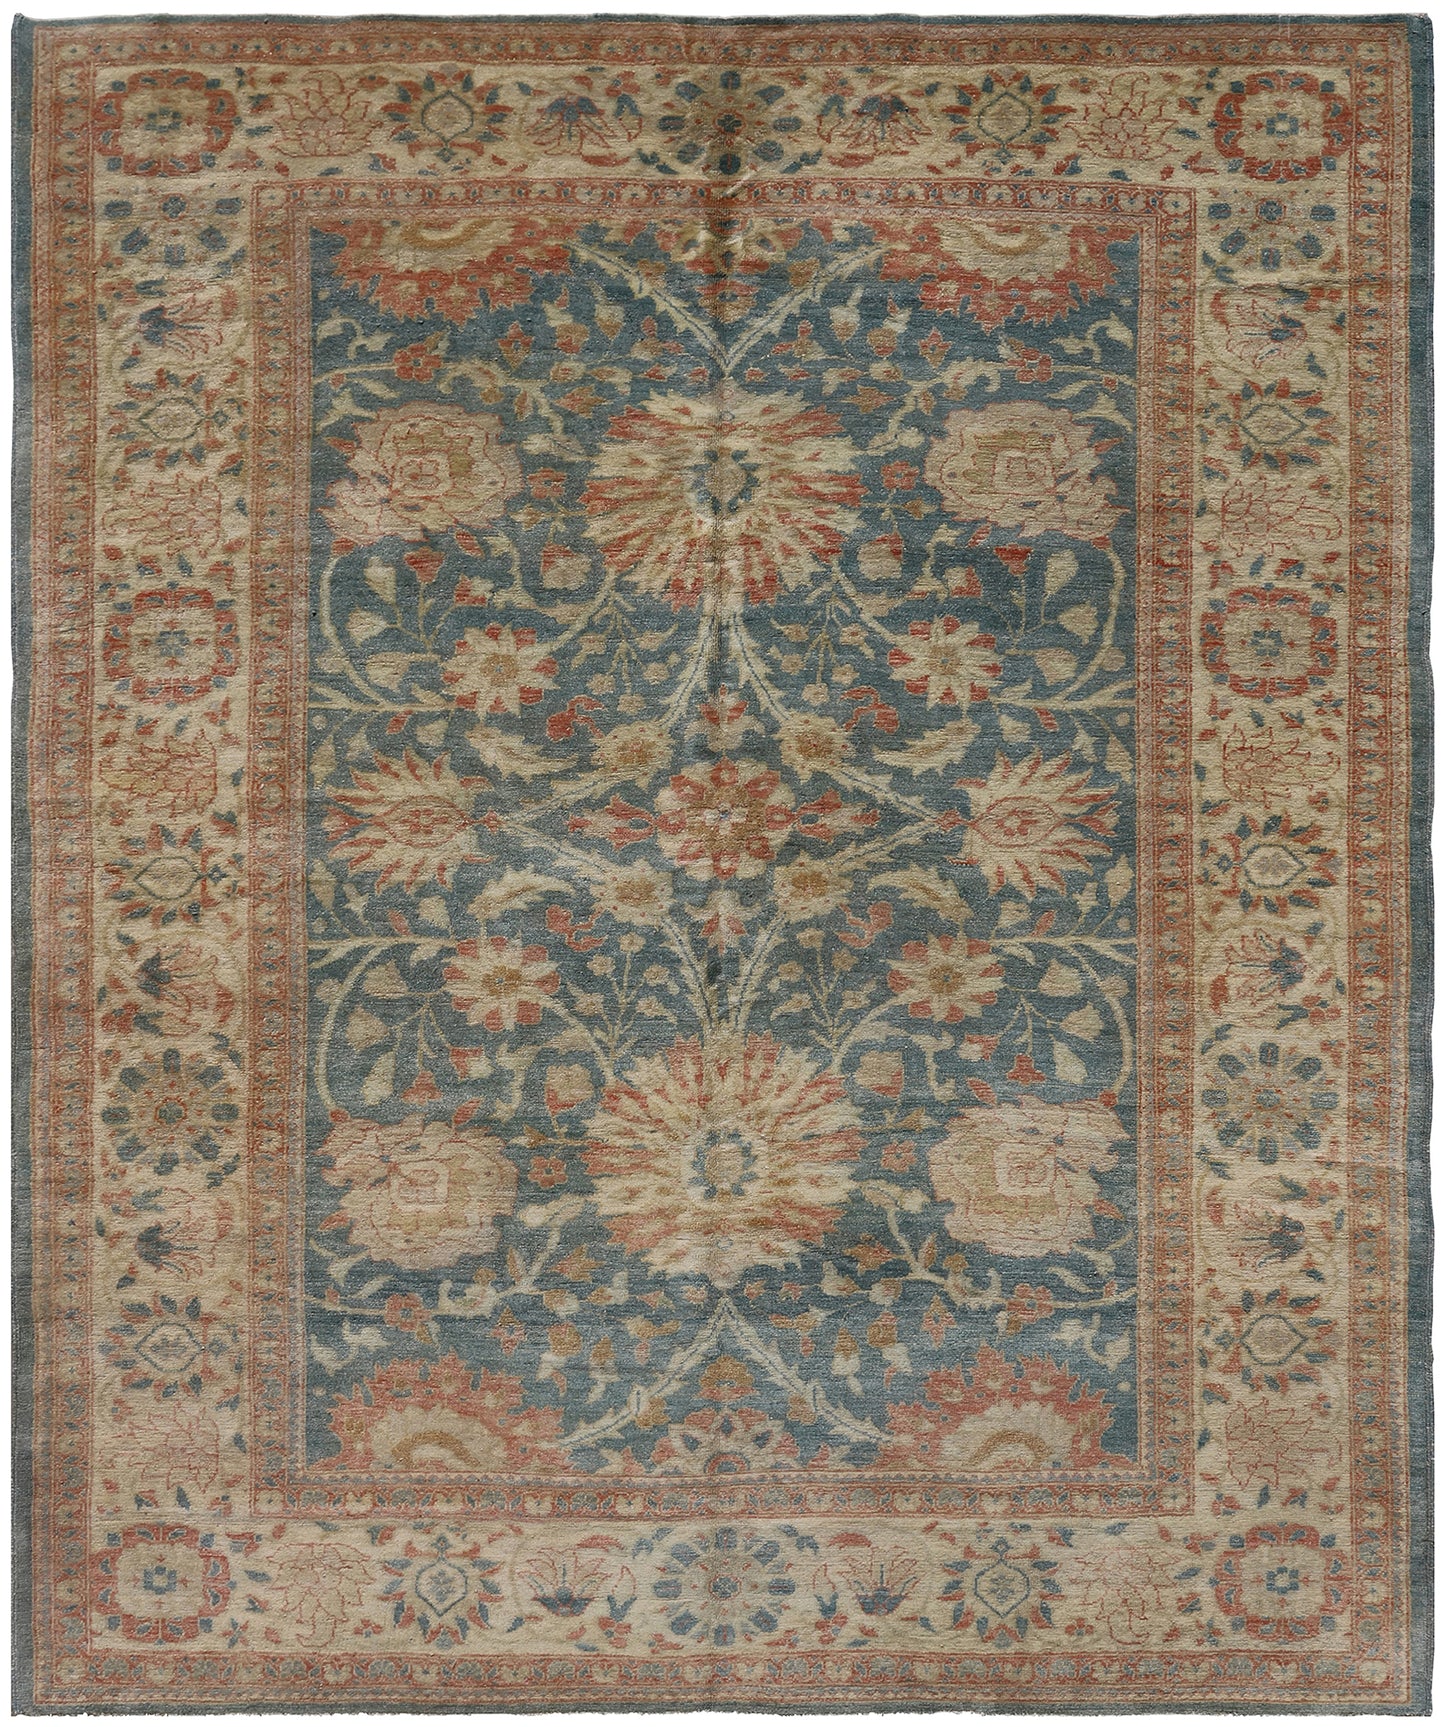 8'x10' Green and Terra Cotta Sultanabad Design Rug